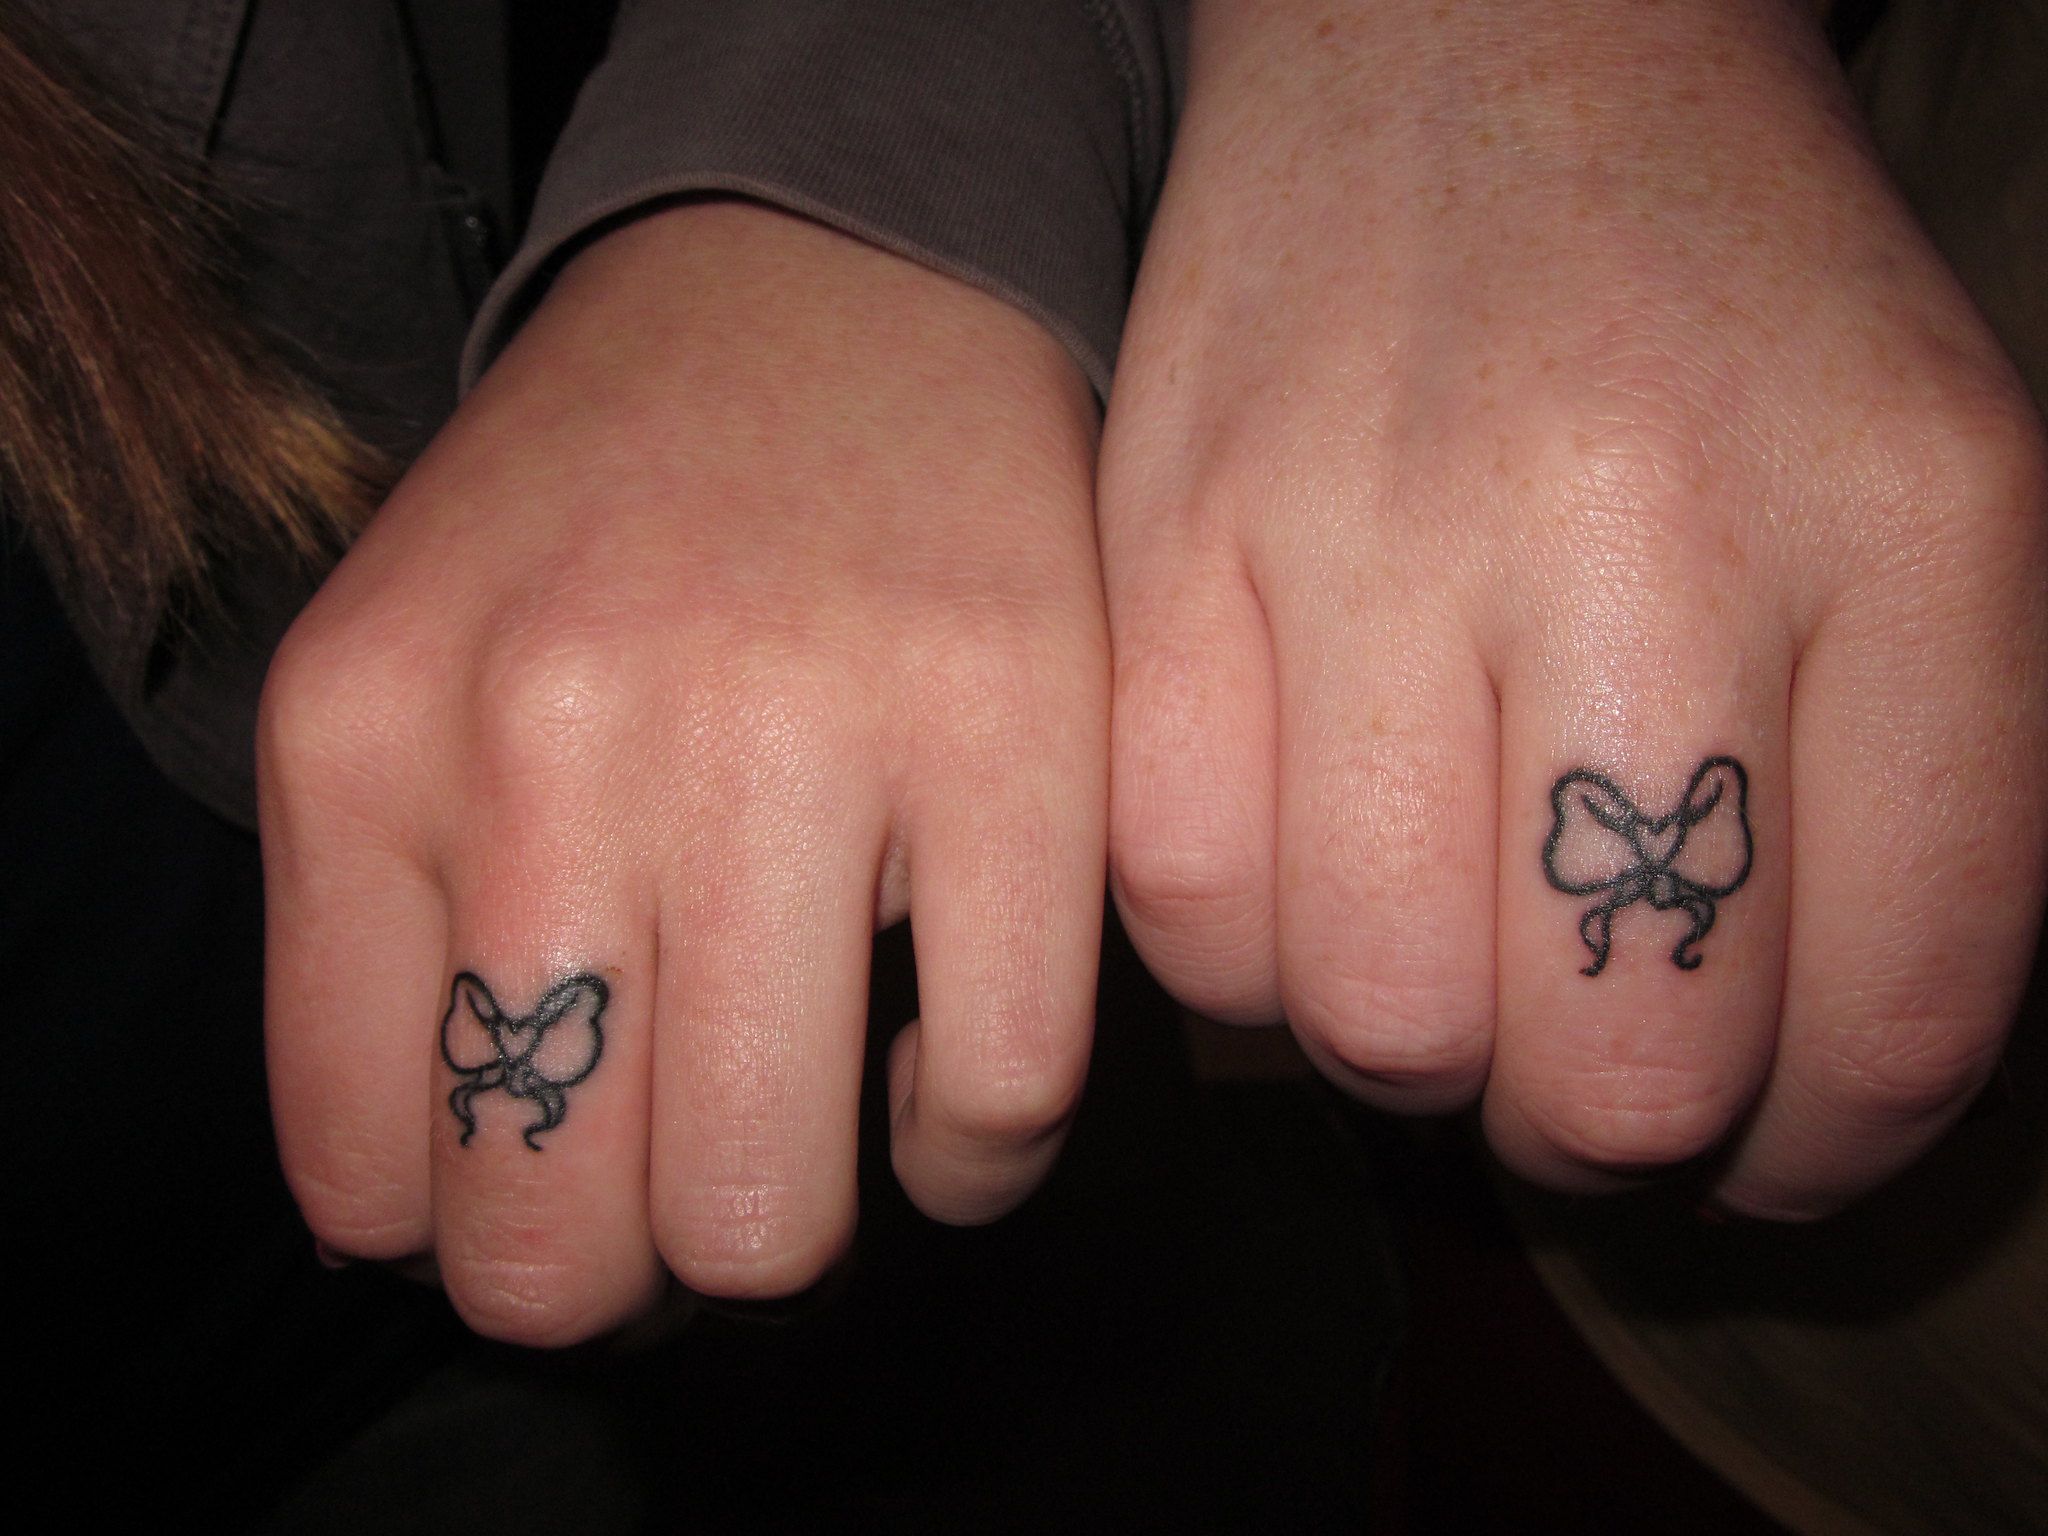 Cute married couples get matching tats to celebrate their wedding day | The  Sun